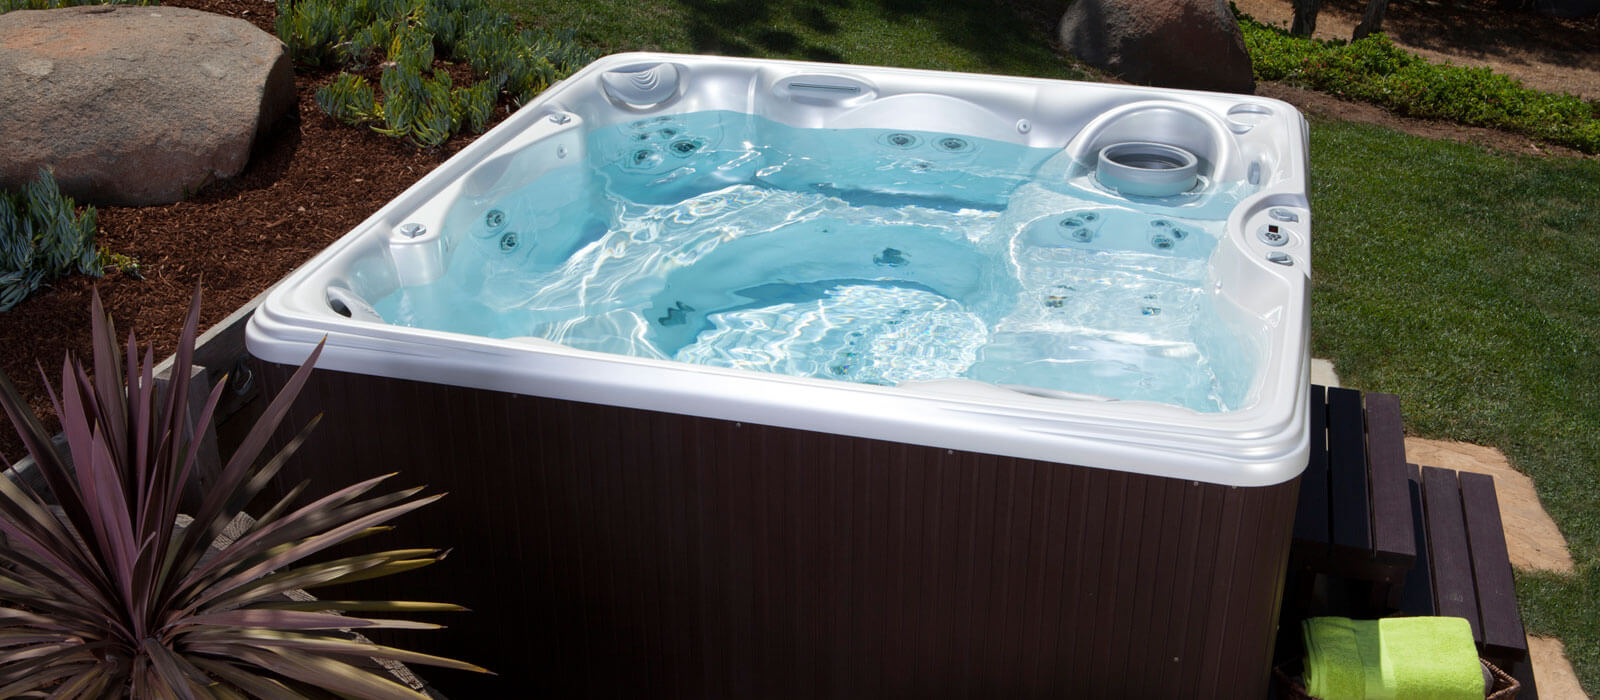 Enhance your hot tub experience with Tempo’s in-spa waterfall and multi-color LED lighting system. Add an optional wireless TV and sound system so you can enjoy your favorite shows and music while soaking in the spa. 